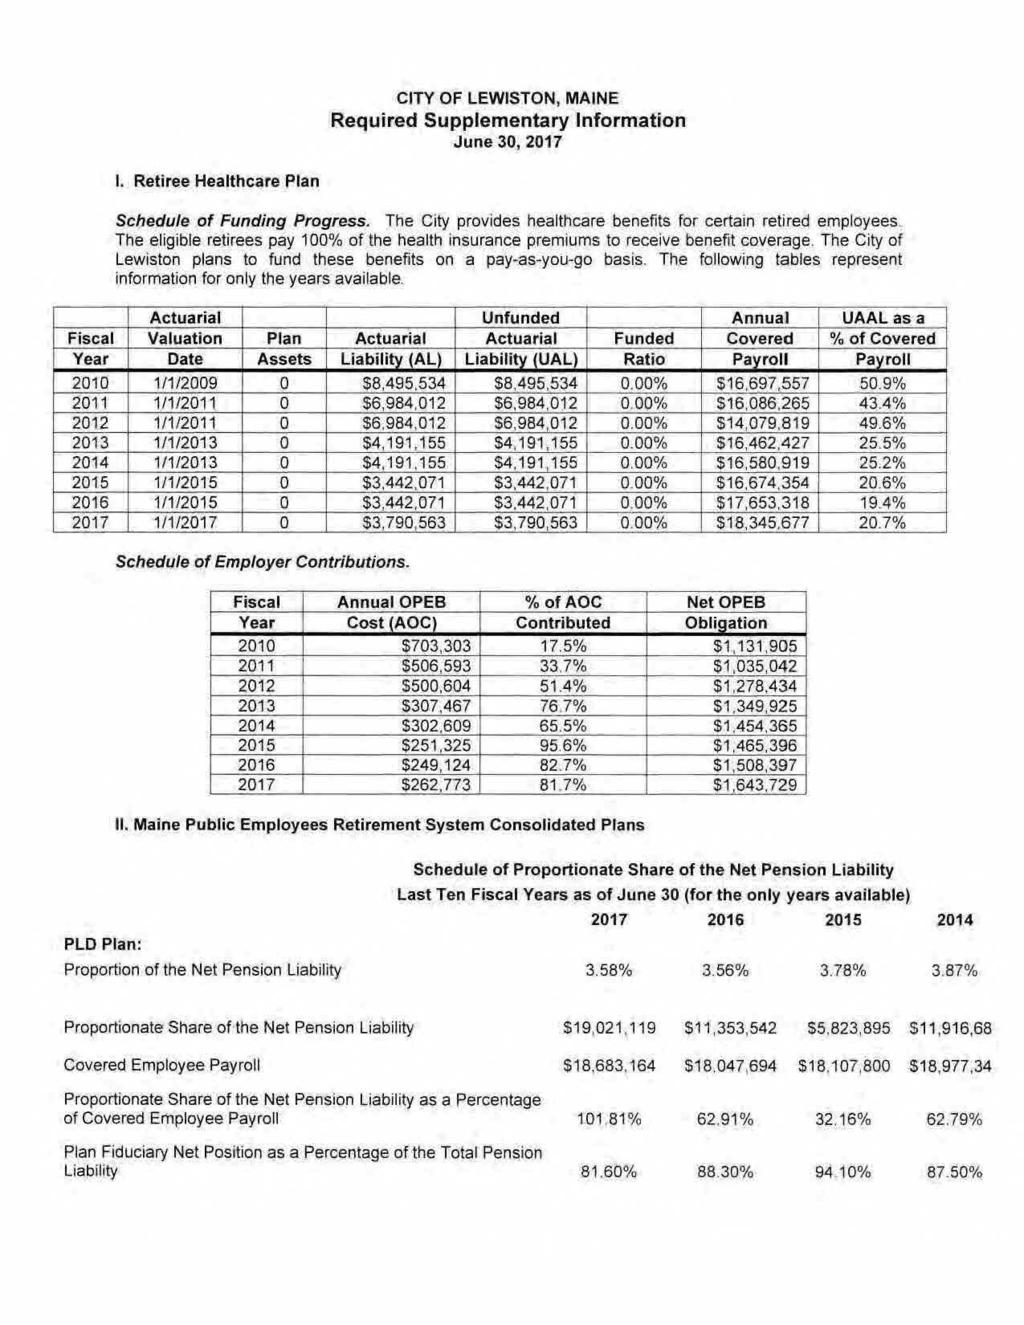 CITY OF LEWISTON, MAINE Required Supplementary lnformauon June 30, 2017 I. Retiree Healthcare Plan Schedule of Funding Progress. The City provides healthcare benefits. for certai.n retired employees.